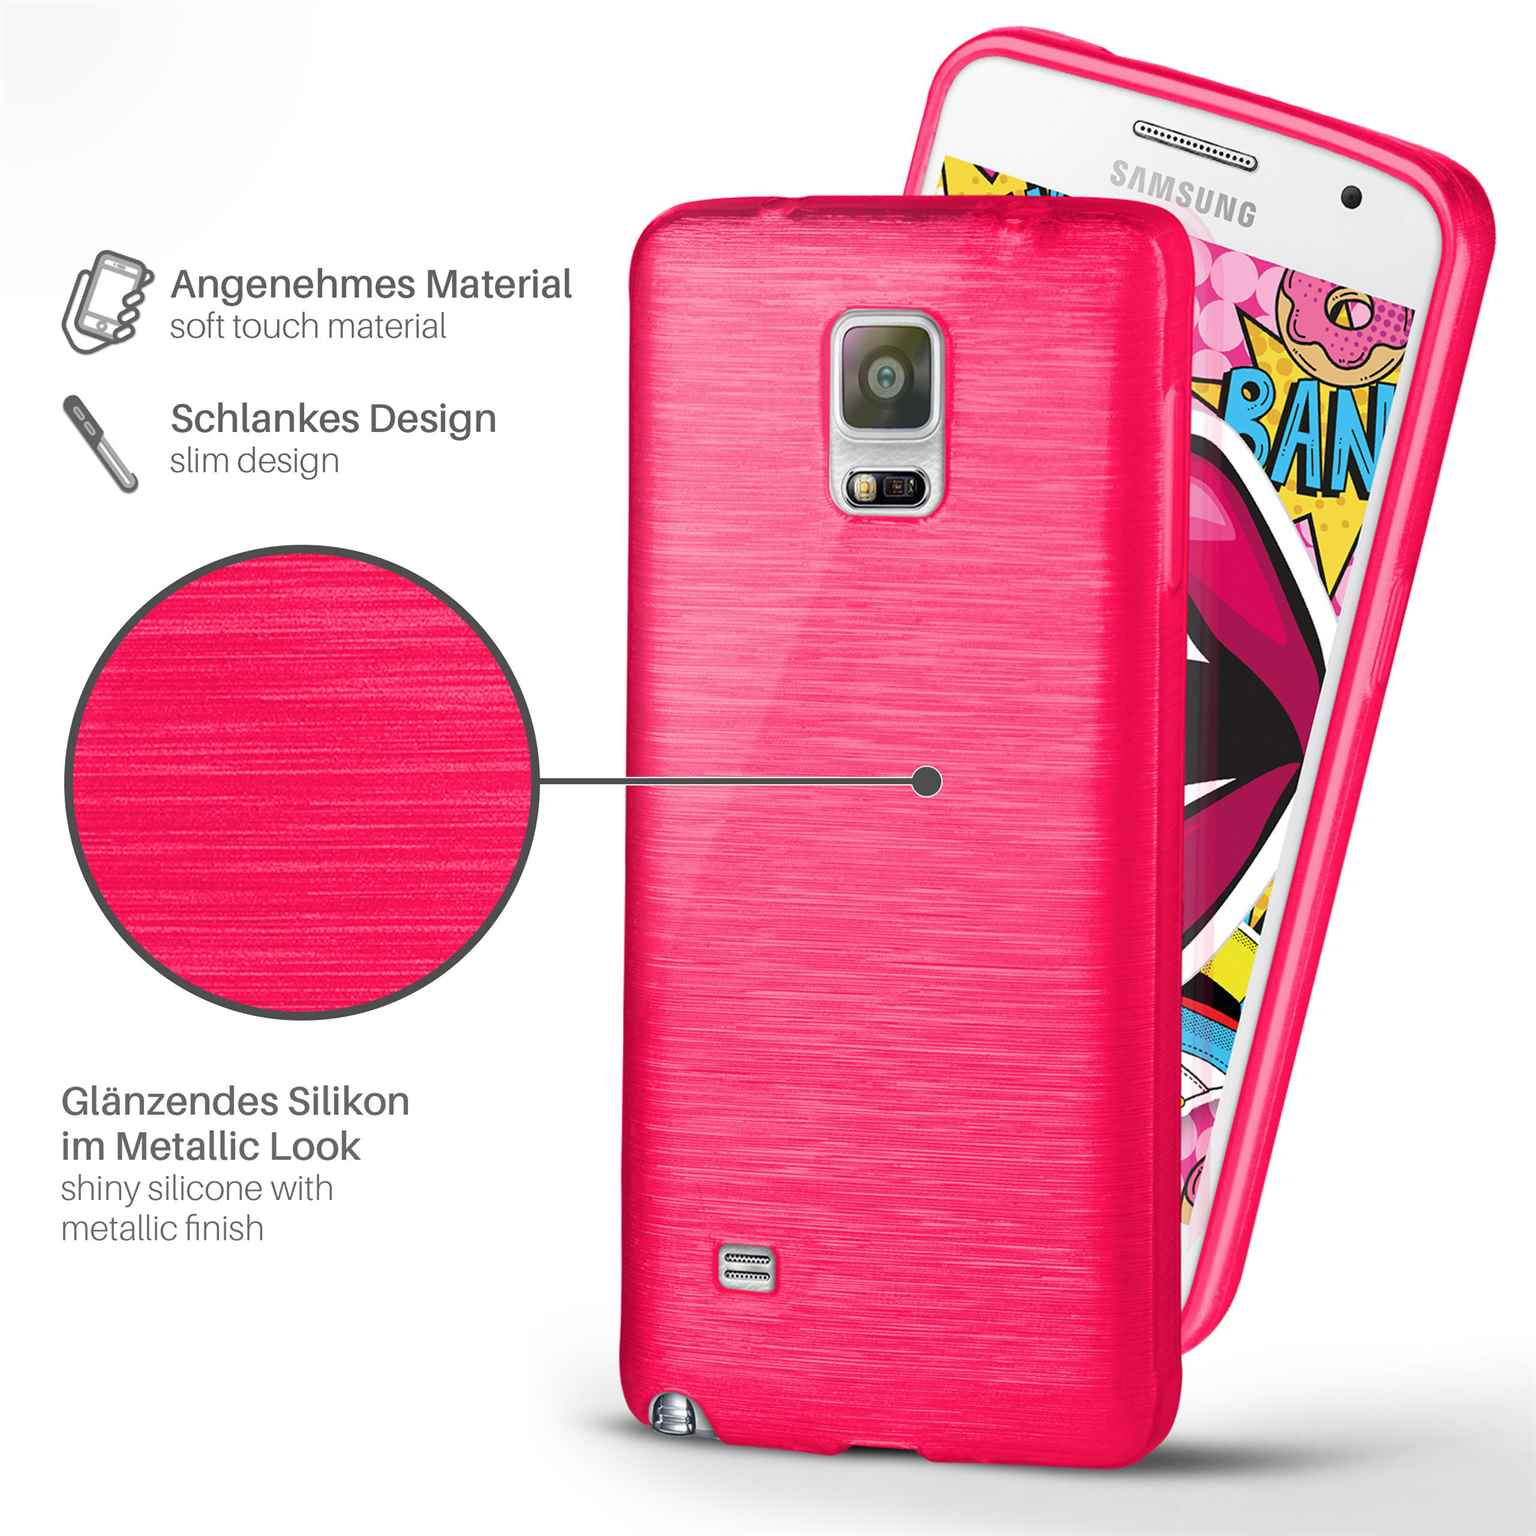 4, Galaxy Note MOEX Case, Samsung, Backcover, Magenta-Pink Brushed